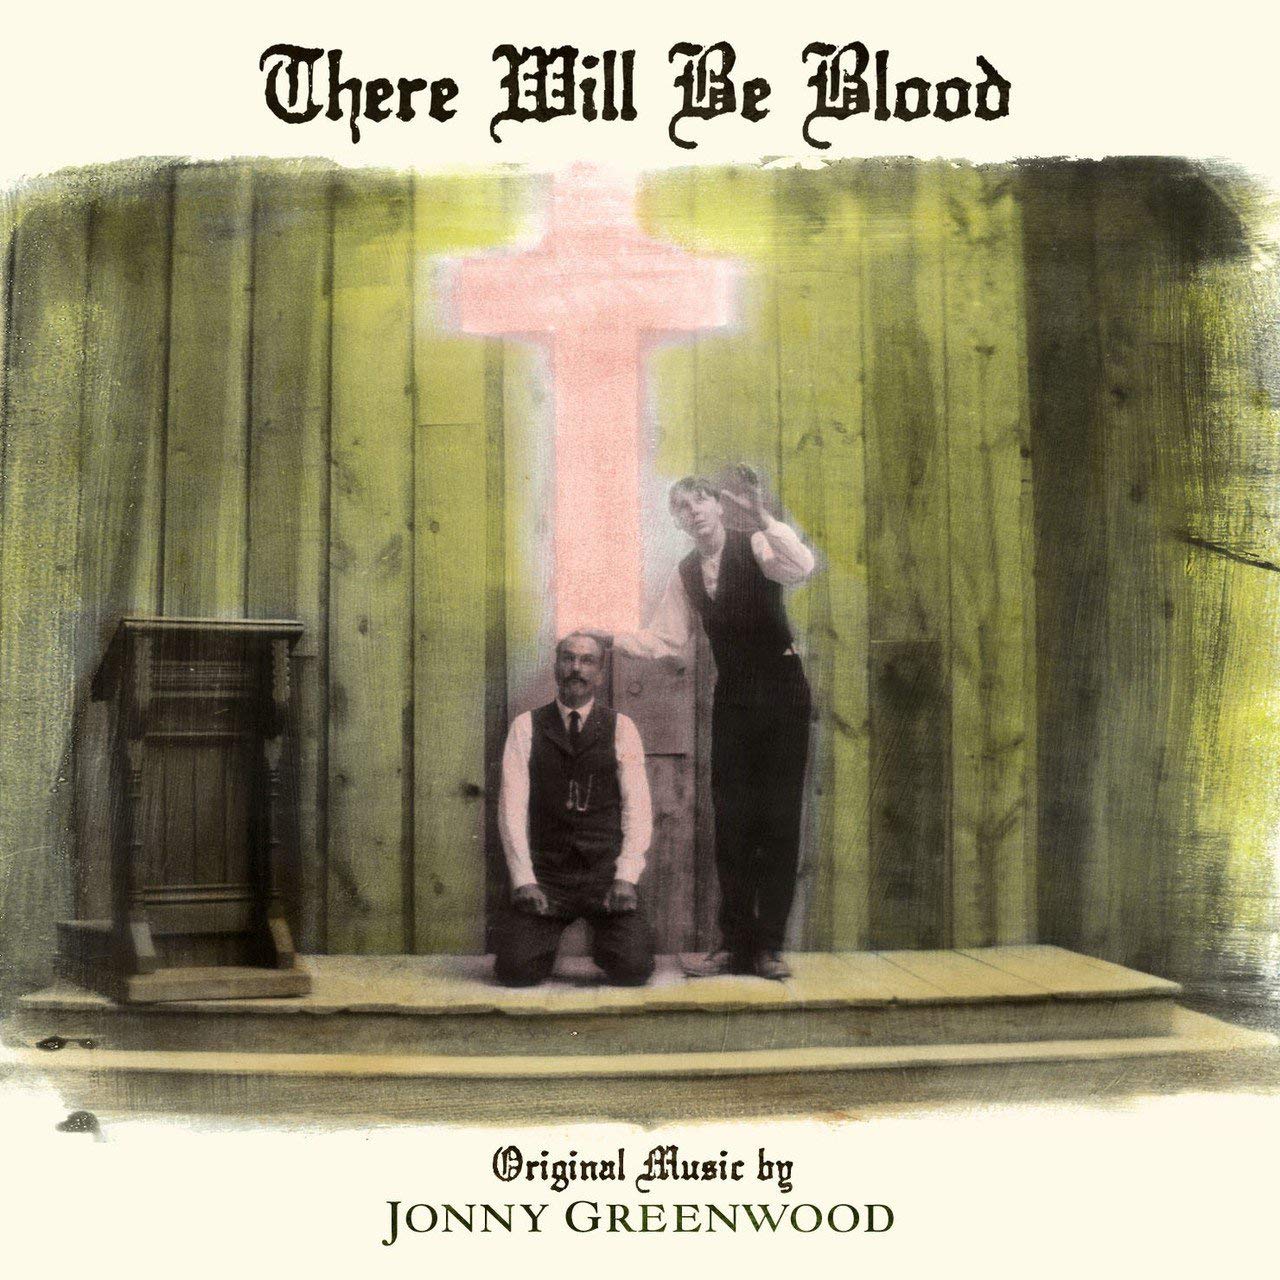 Jonny Greenwood - There Will Be Blood vinyl cover